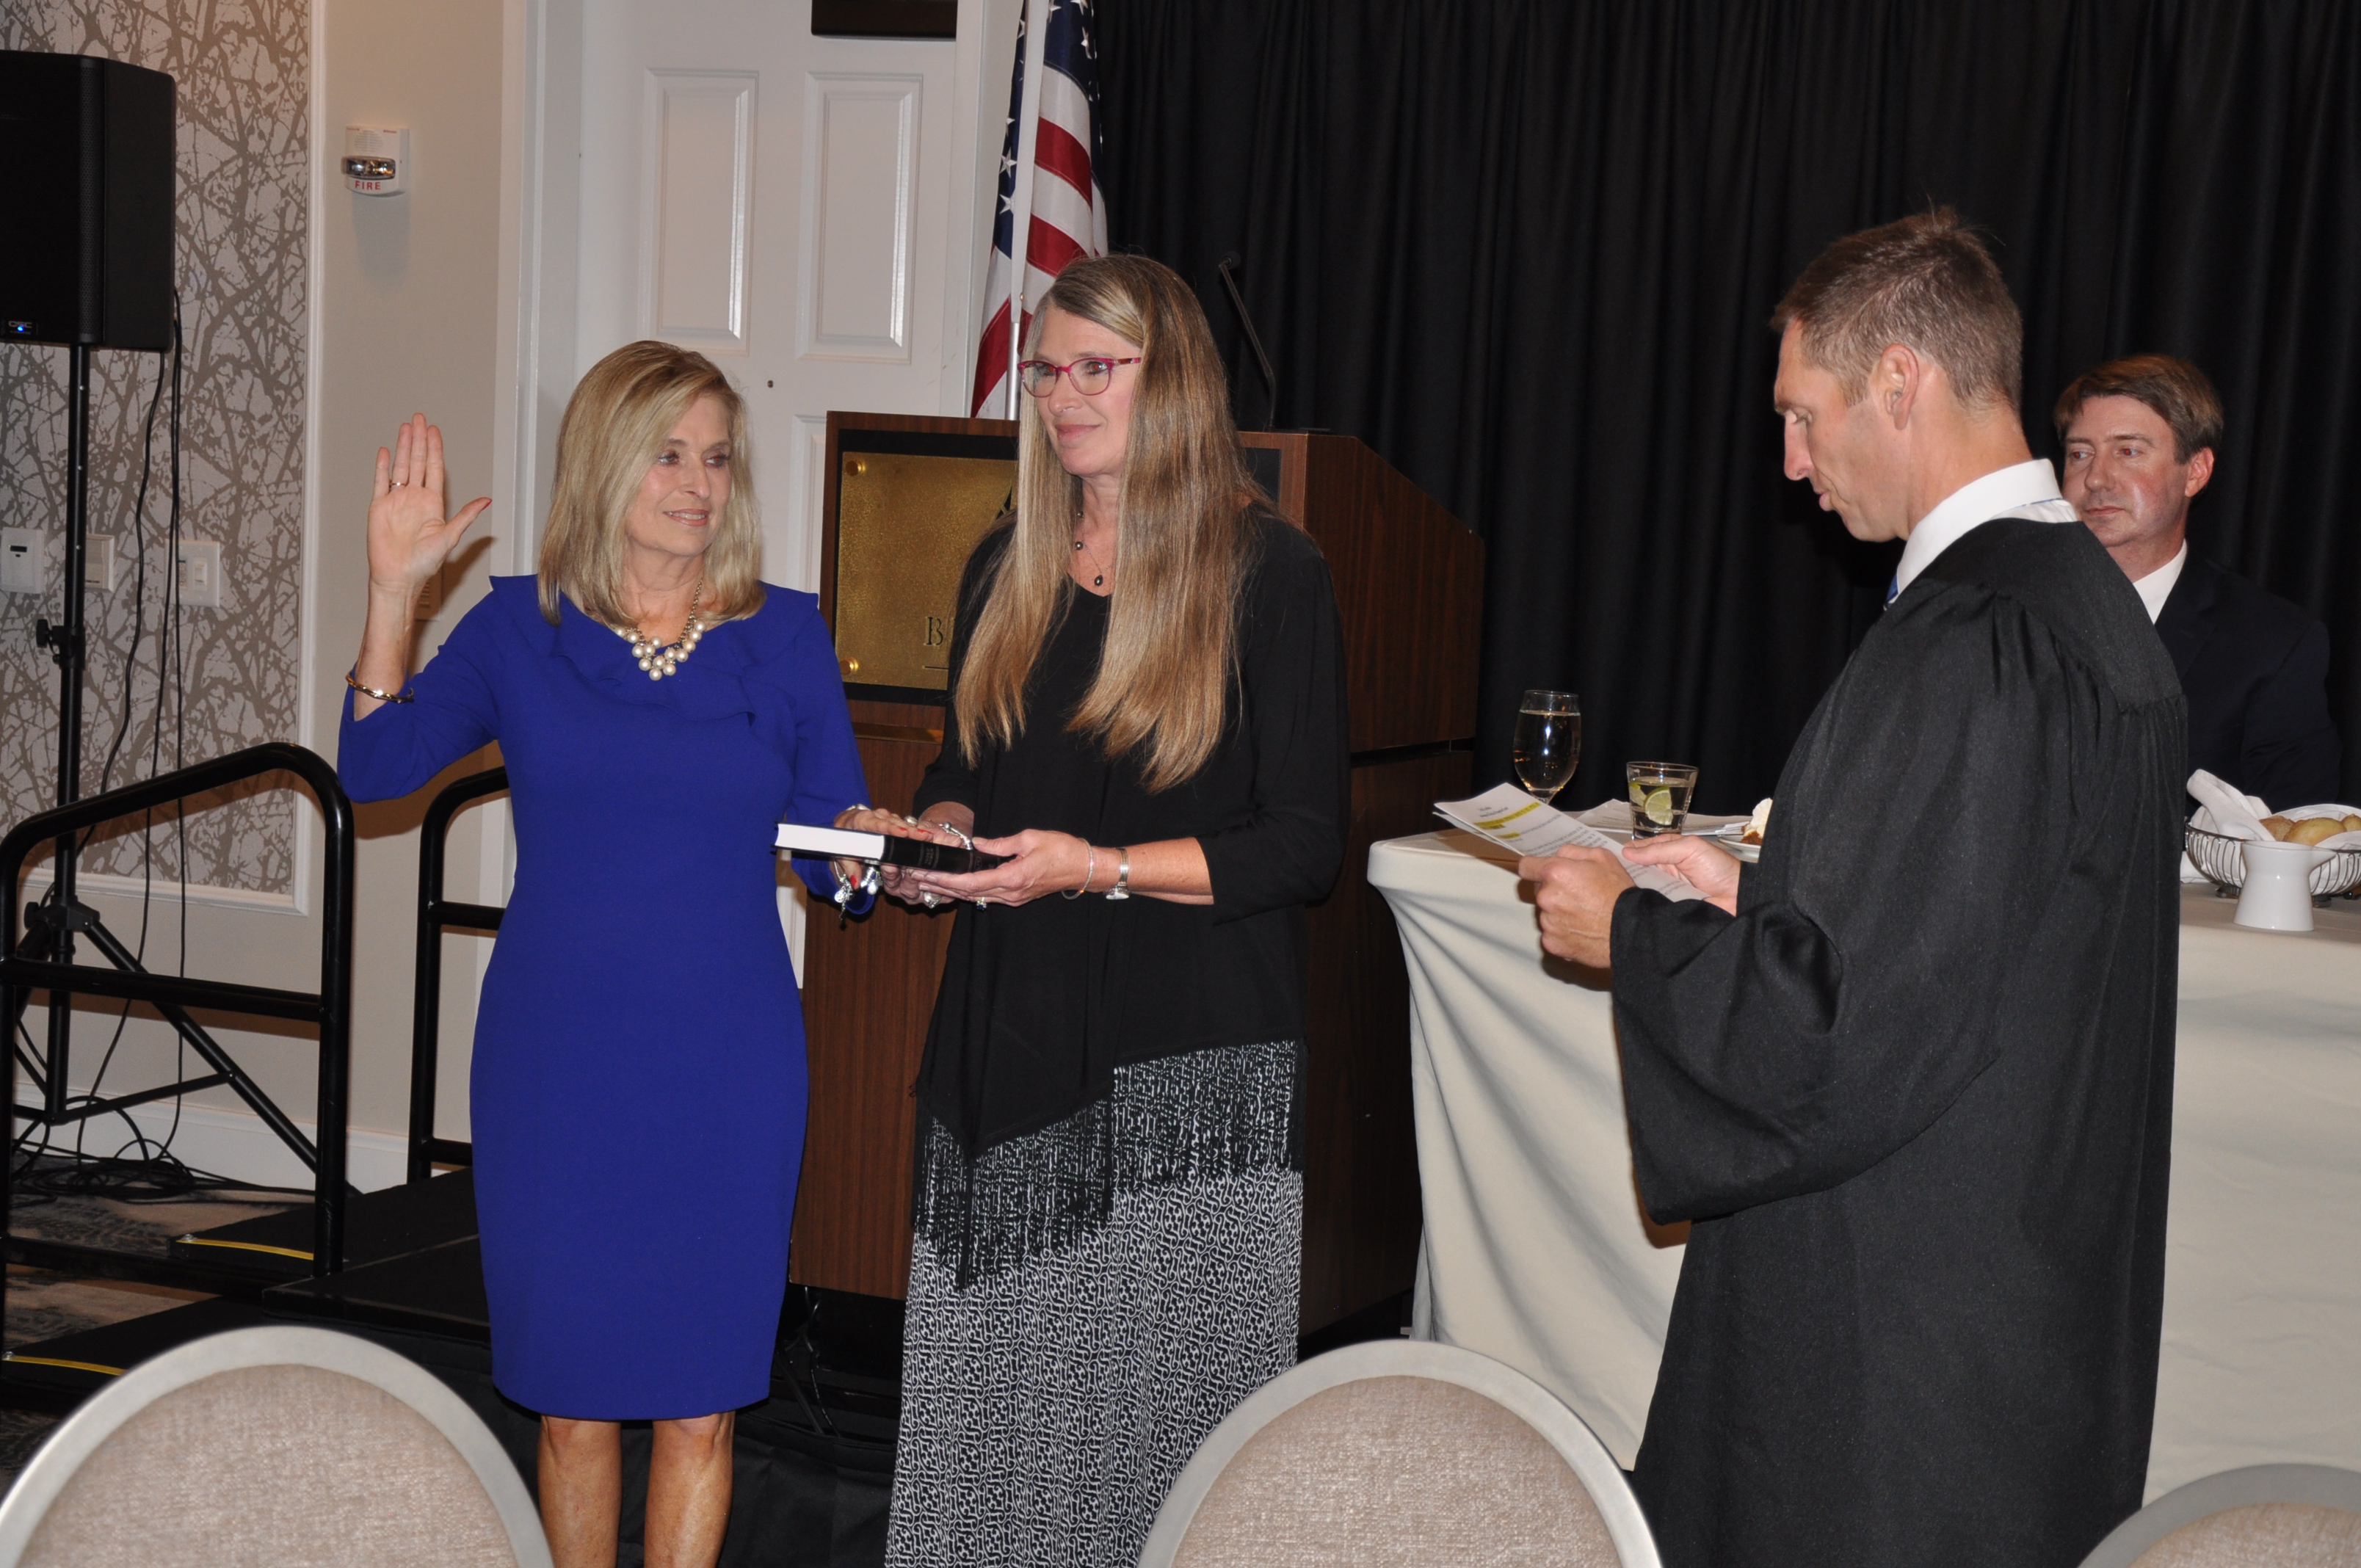 Judge Jefferson Griffin swears in incoming president Catawba County Clerk Kim Sigmon as Lee County Clerk Susie Thomas holds the Bible.